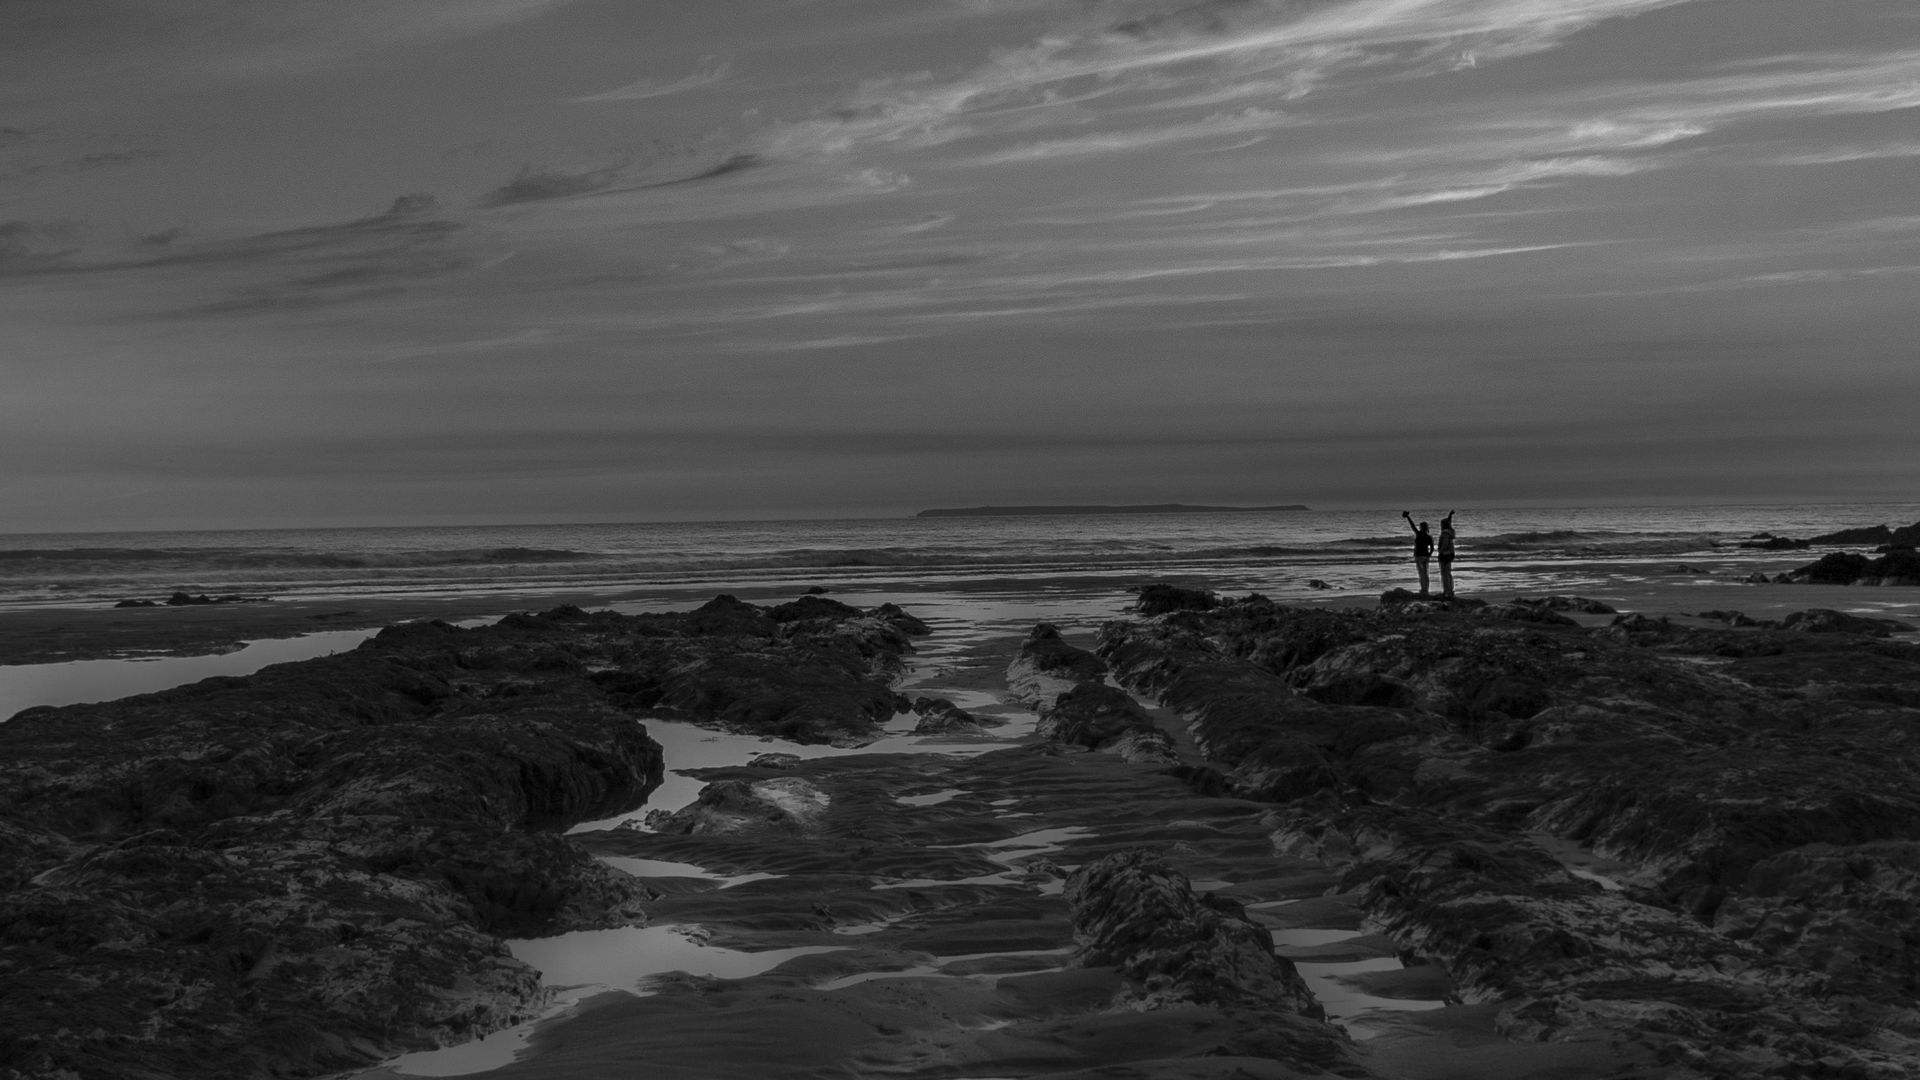 Download wallpaper 1920x1080 couple, silhouettes, coast, black and ...